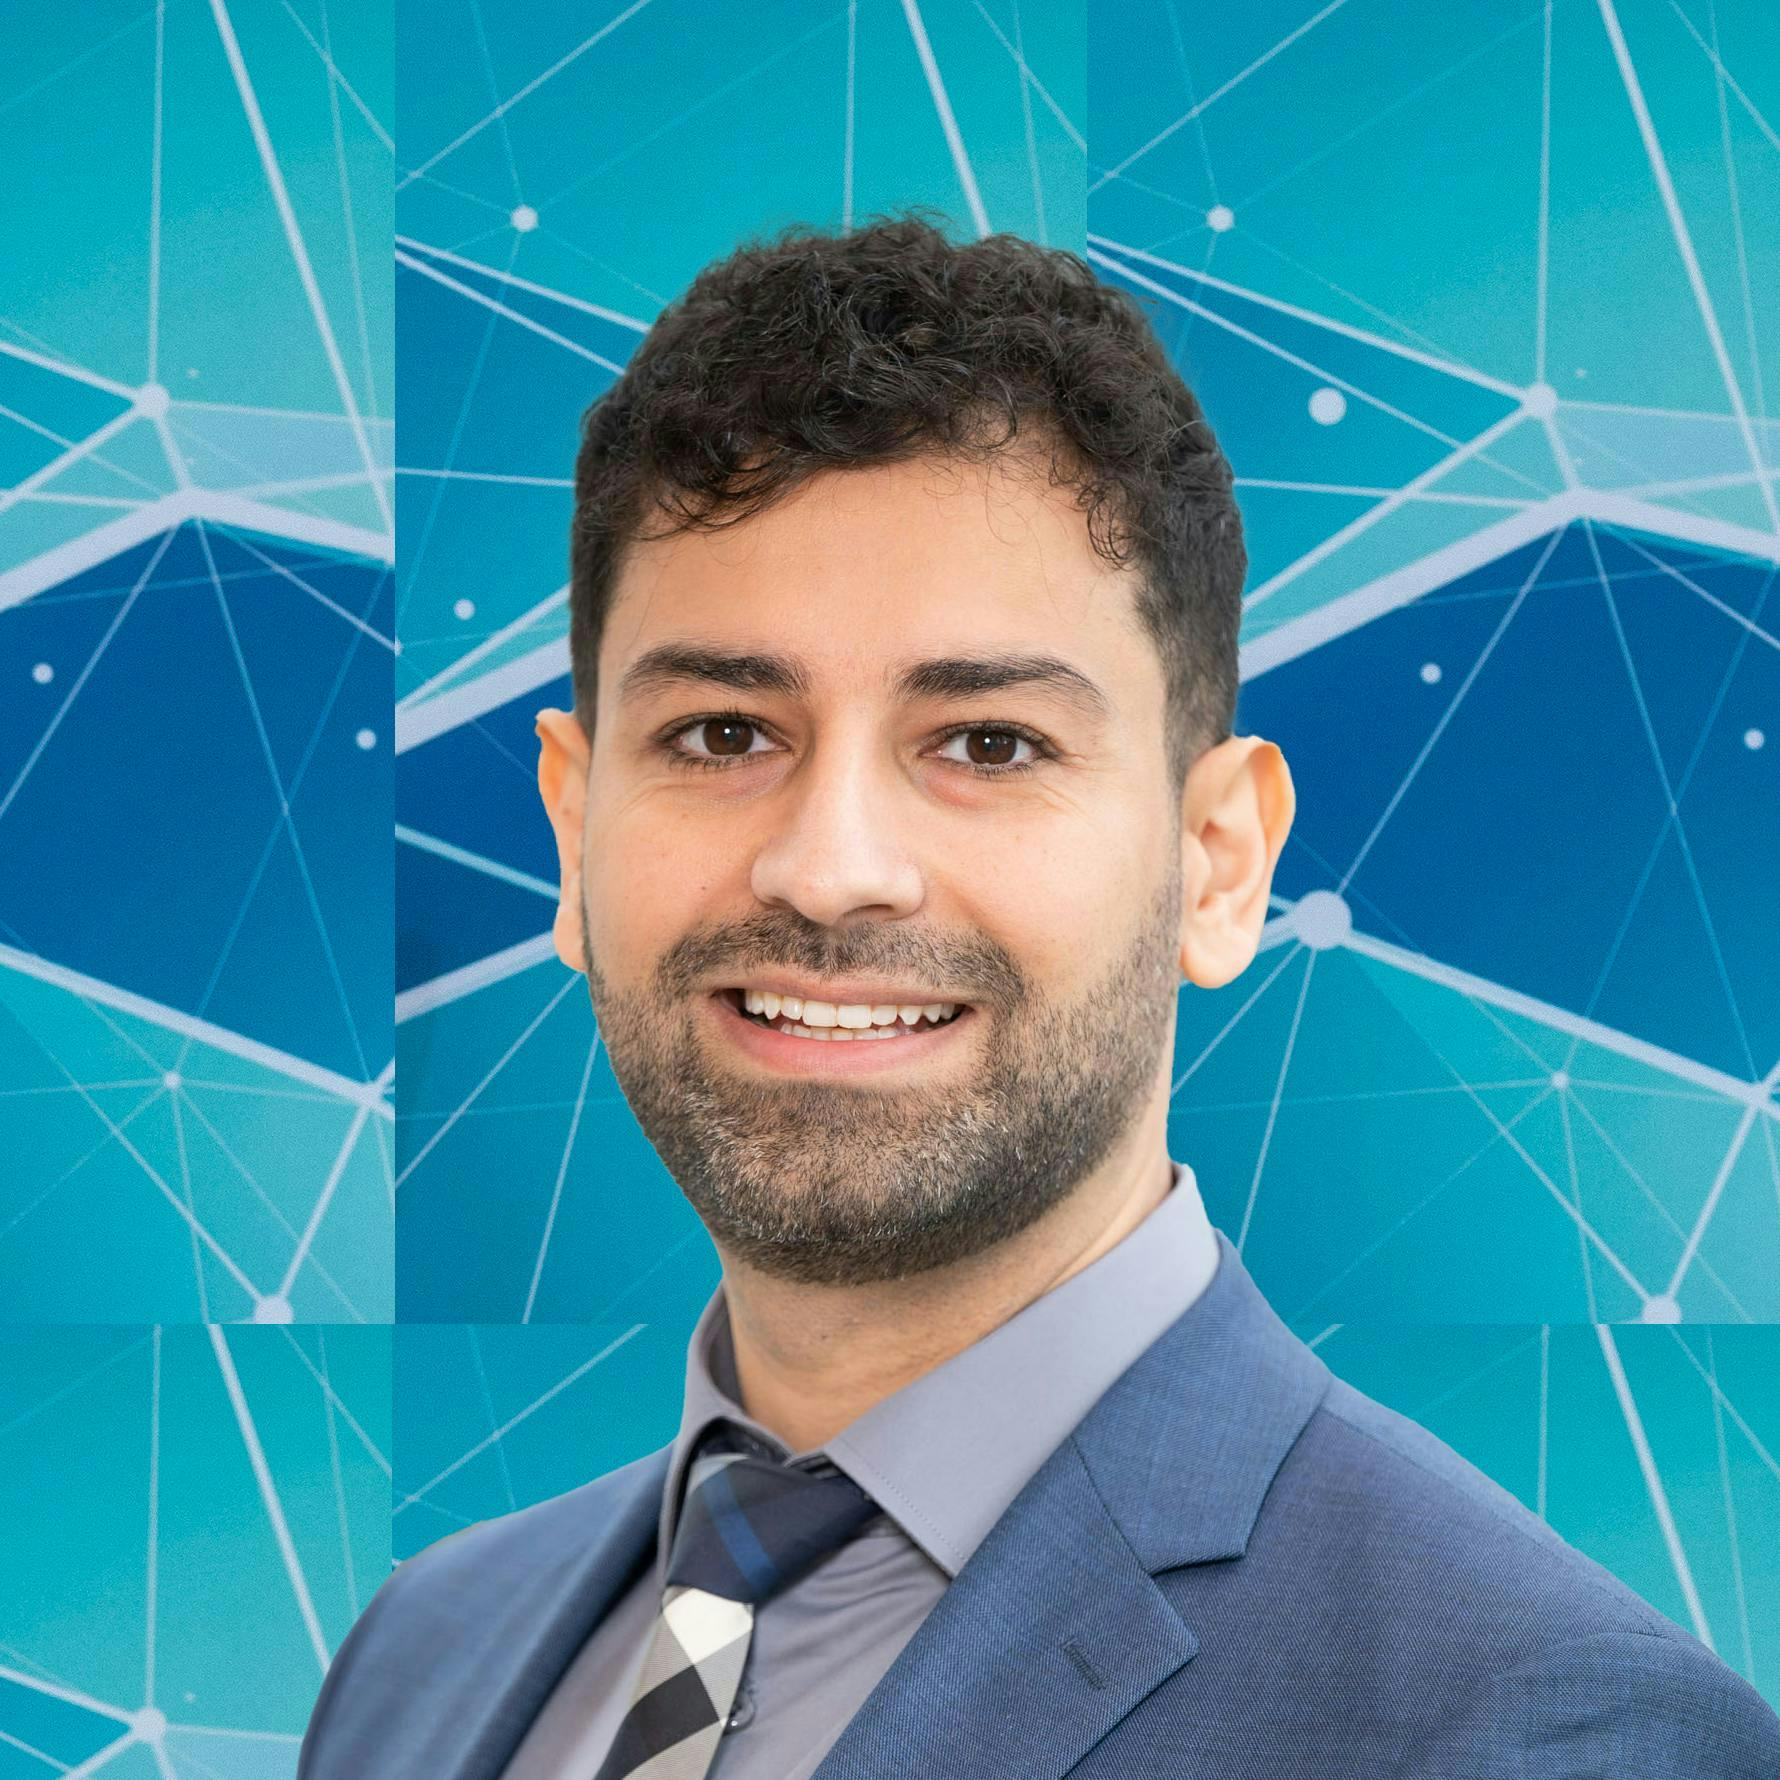 Figure 1: Dr. Sohail Nazari has a Ph.D. in control systems and electrical engineering. He has worked in the pulp and paper and mining and mineral processing industries, and now serves as global vice president and head of automation and digitalization for Andritz feed and biofuel.